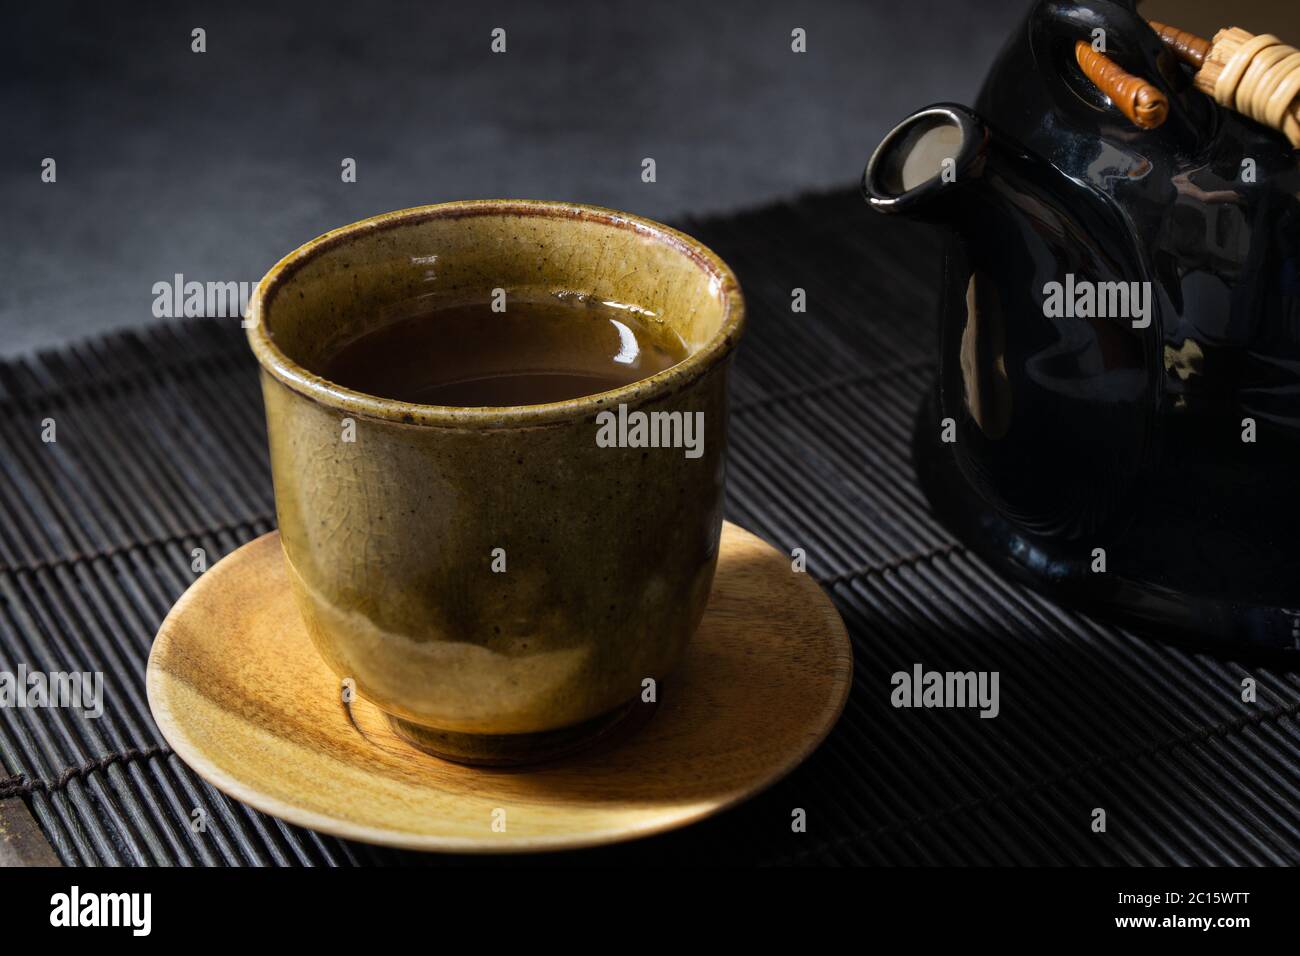 Japanese green tea in a traditional and beautiful clay cup. Japanese dishes and tableware. Stock Photo